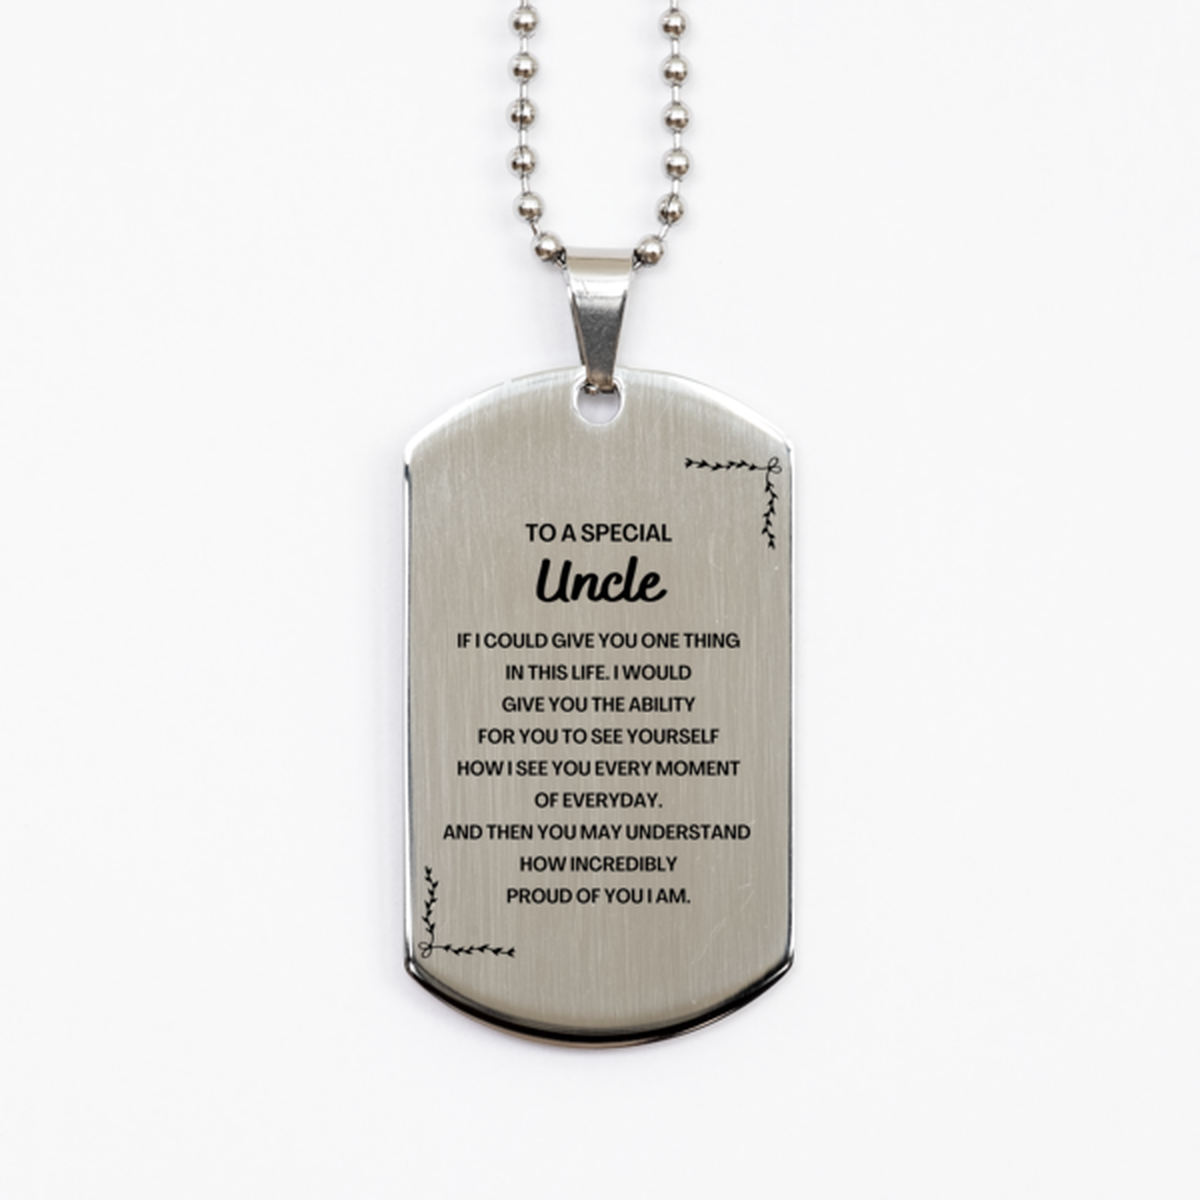 To My Uncle Silver Dog Tag, Gifts For Uncle Engraved, Inspirational Gifts for Christmas Birthday, Epic Gifts for Uncle To A Special Uncle how incredibly proud of you I am